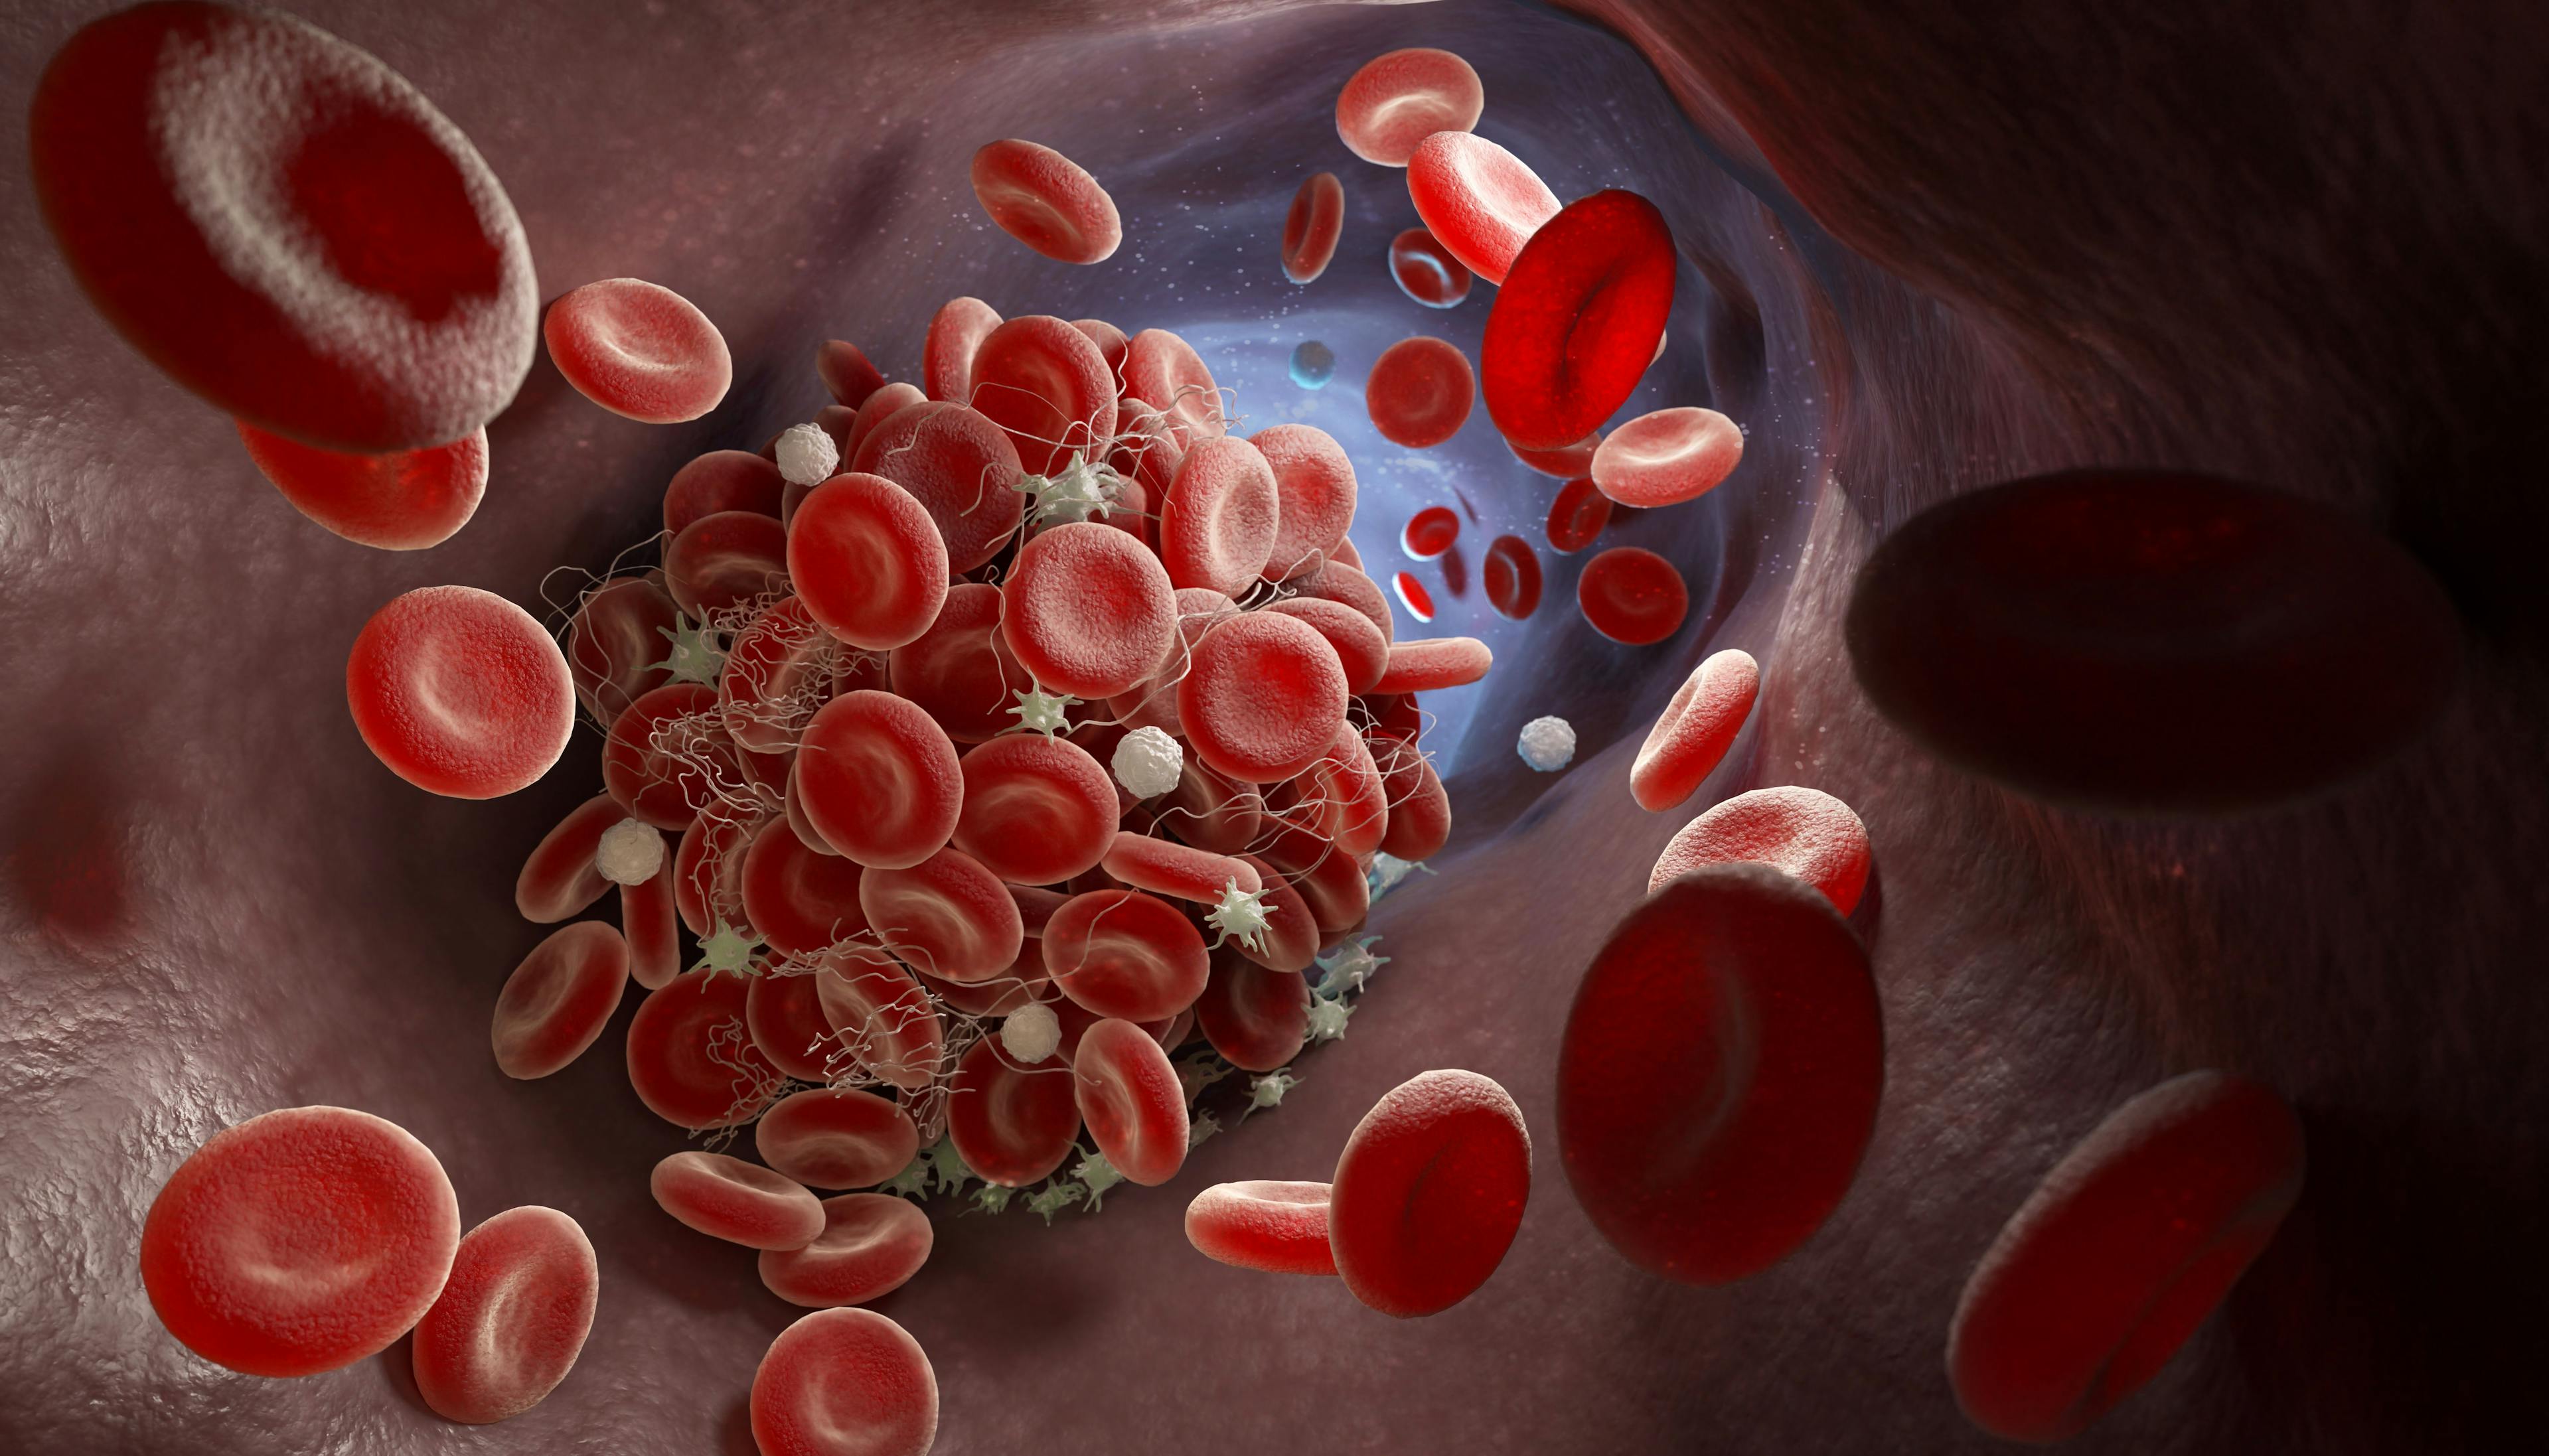 Longer Anticoagulant Treatment Provides Greater Blood Clot Prevention in Patients With Cancer